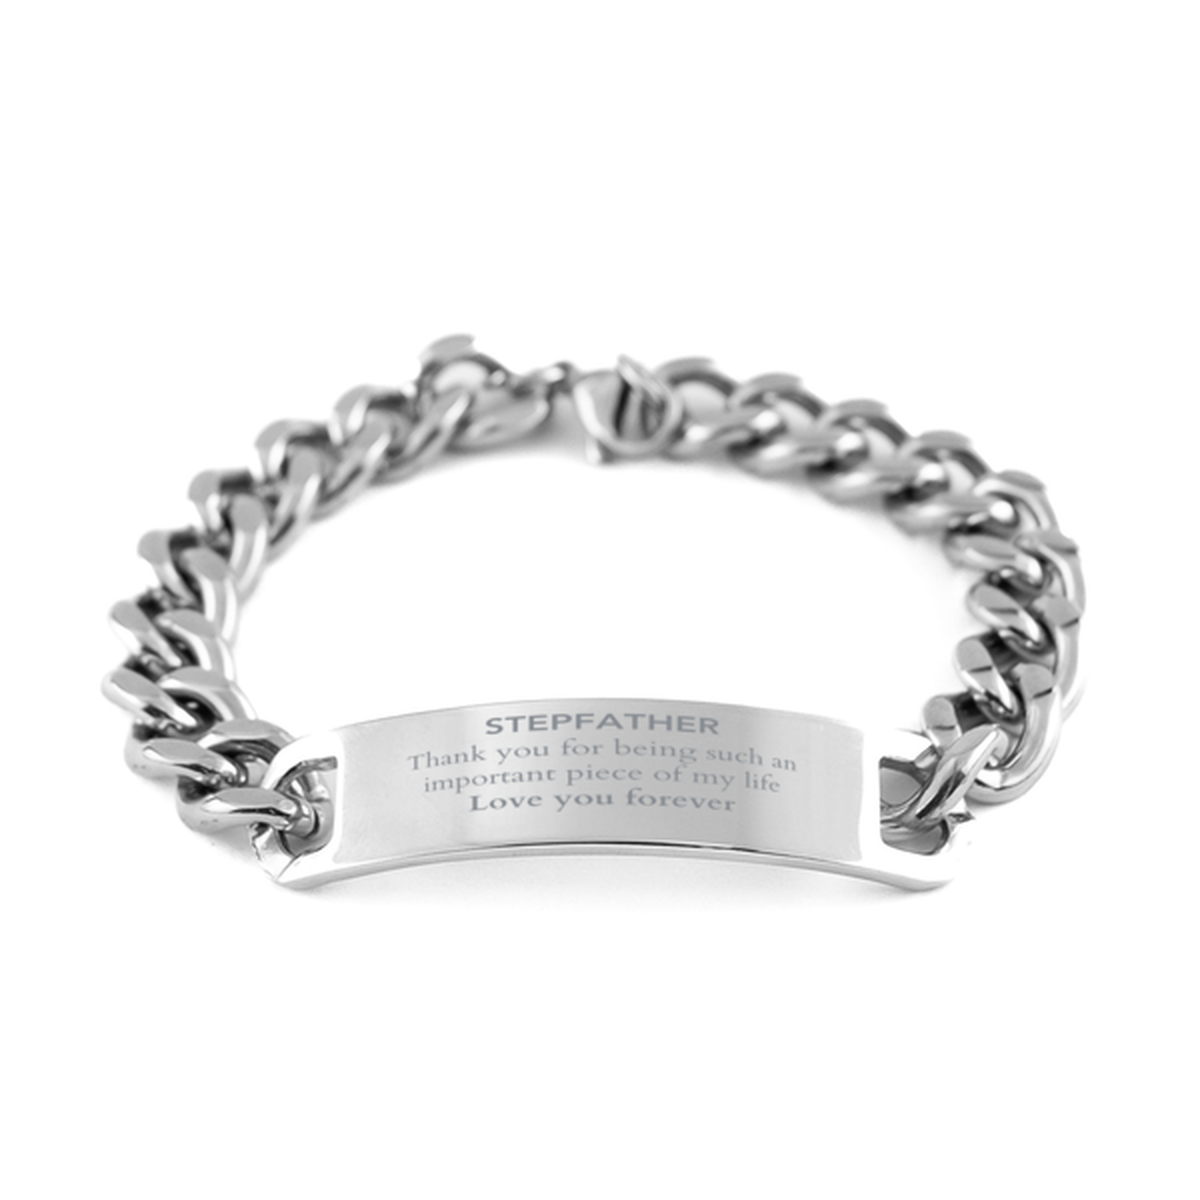 Appropriate Stepfather Cuban Chain Stainless Steel Bracelet Epic Birthday Gifts for Stepfather Thank you for being such an important piece of my life Stepfather Christmas Mothers Fathers Day